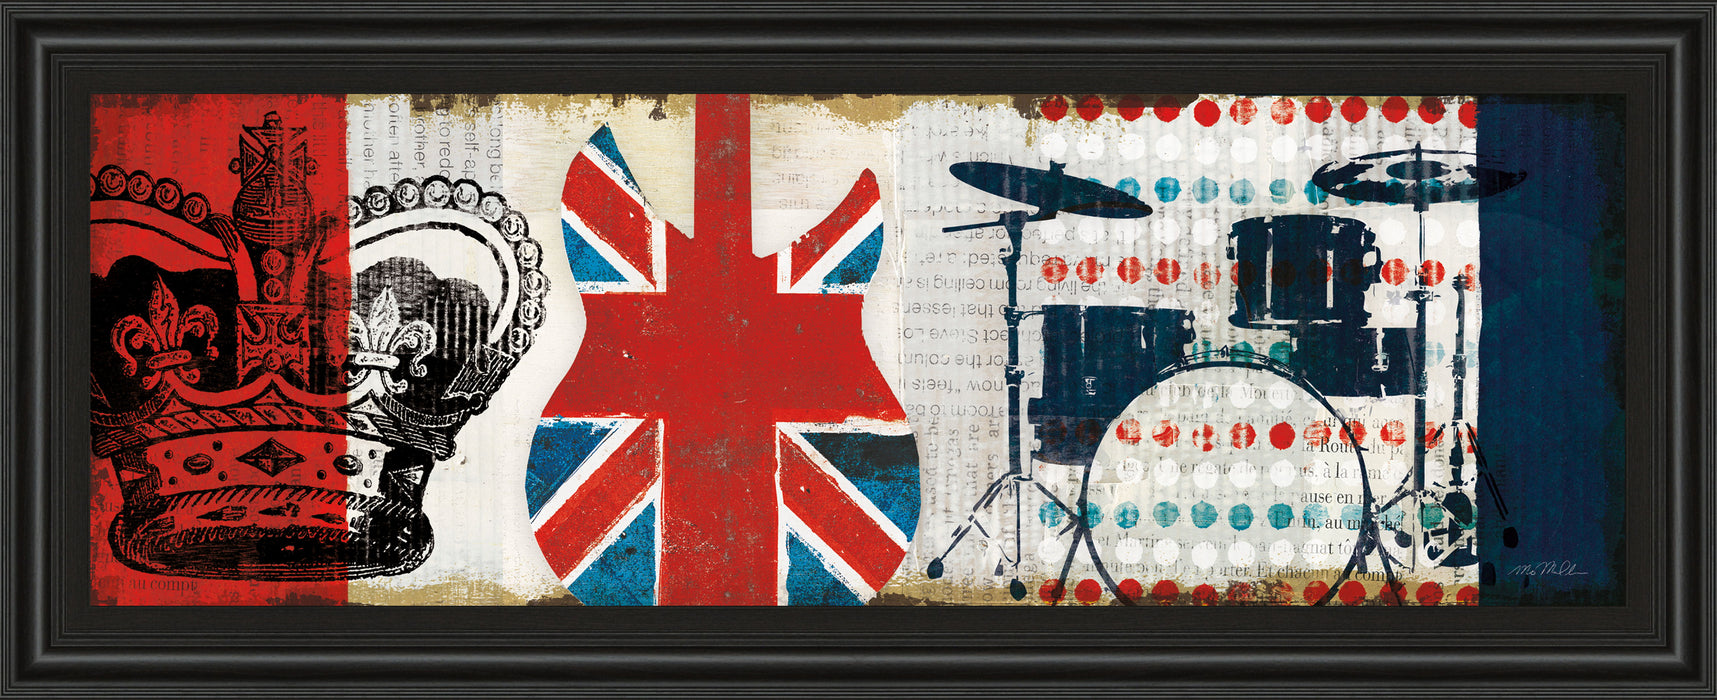 British Invasion Il By Mo Mullan - Framed Print Wall Art - Red